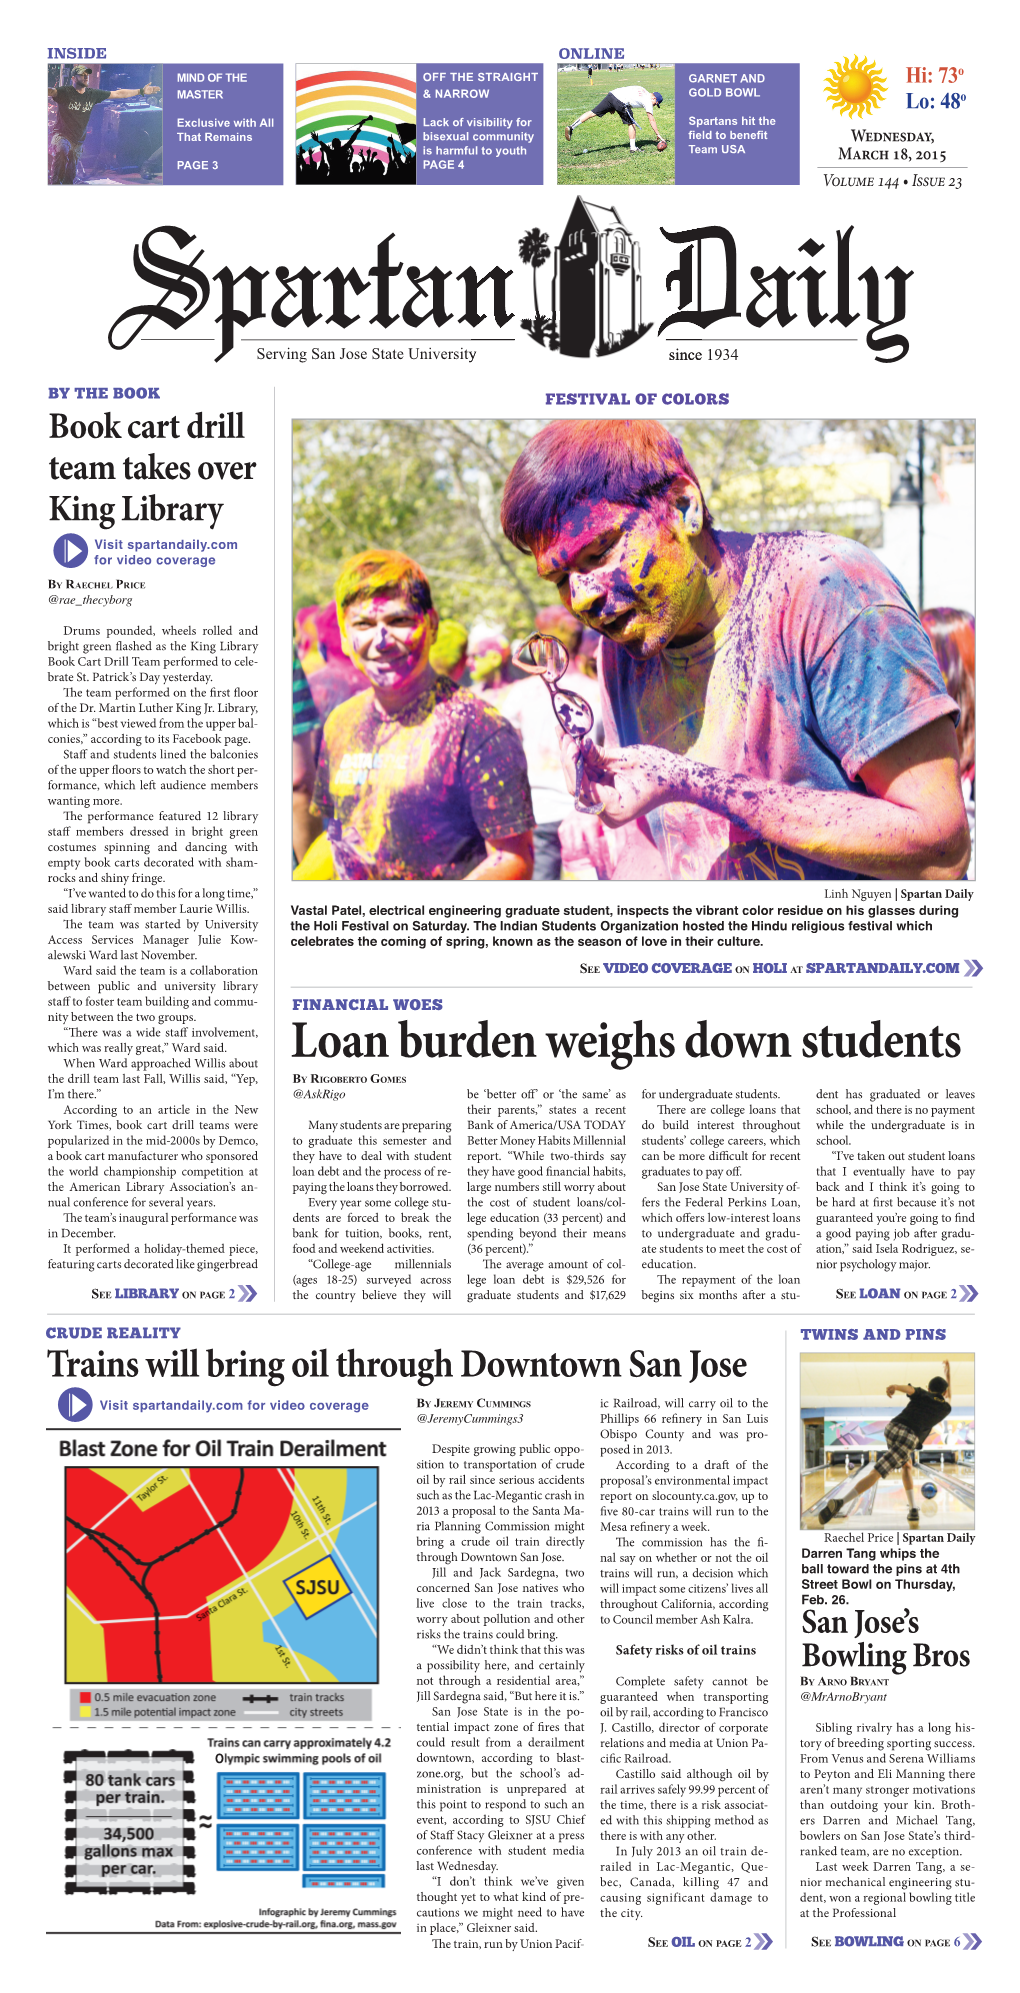 Spartan Daily, March 18, 2015